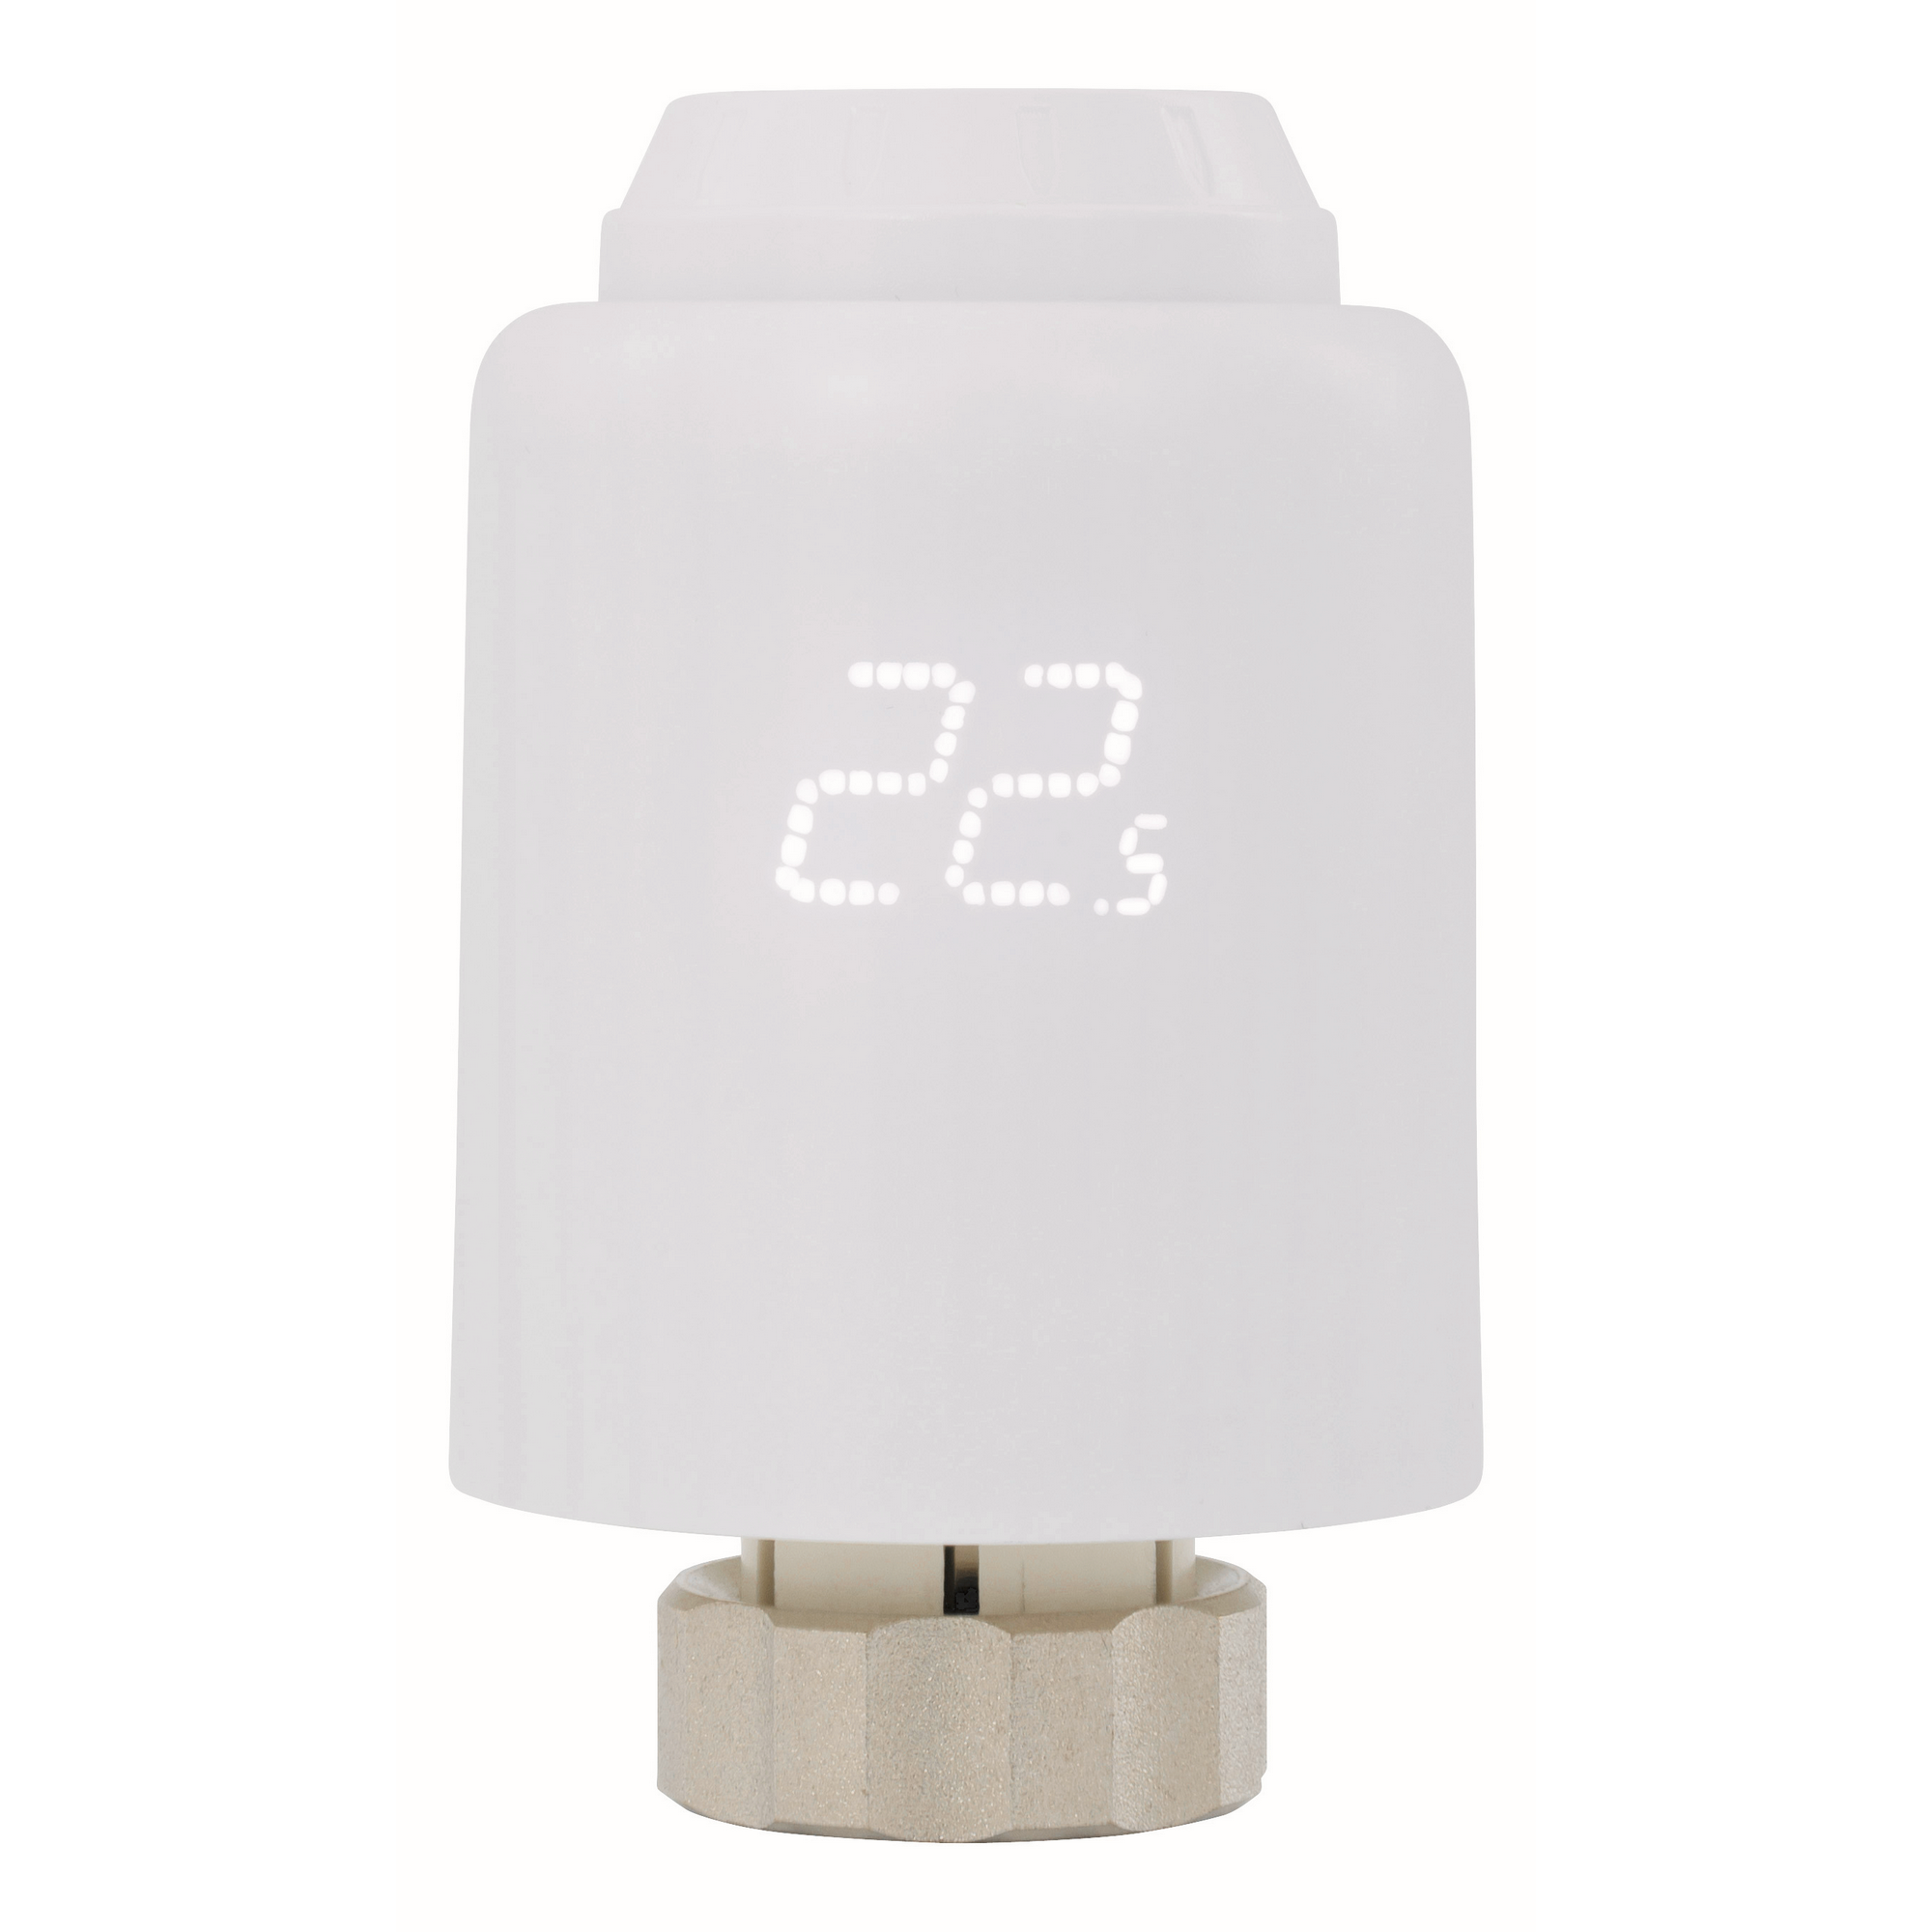 LED ZigBee Smart-Heizkörperthermostat + product picture